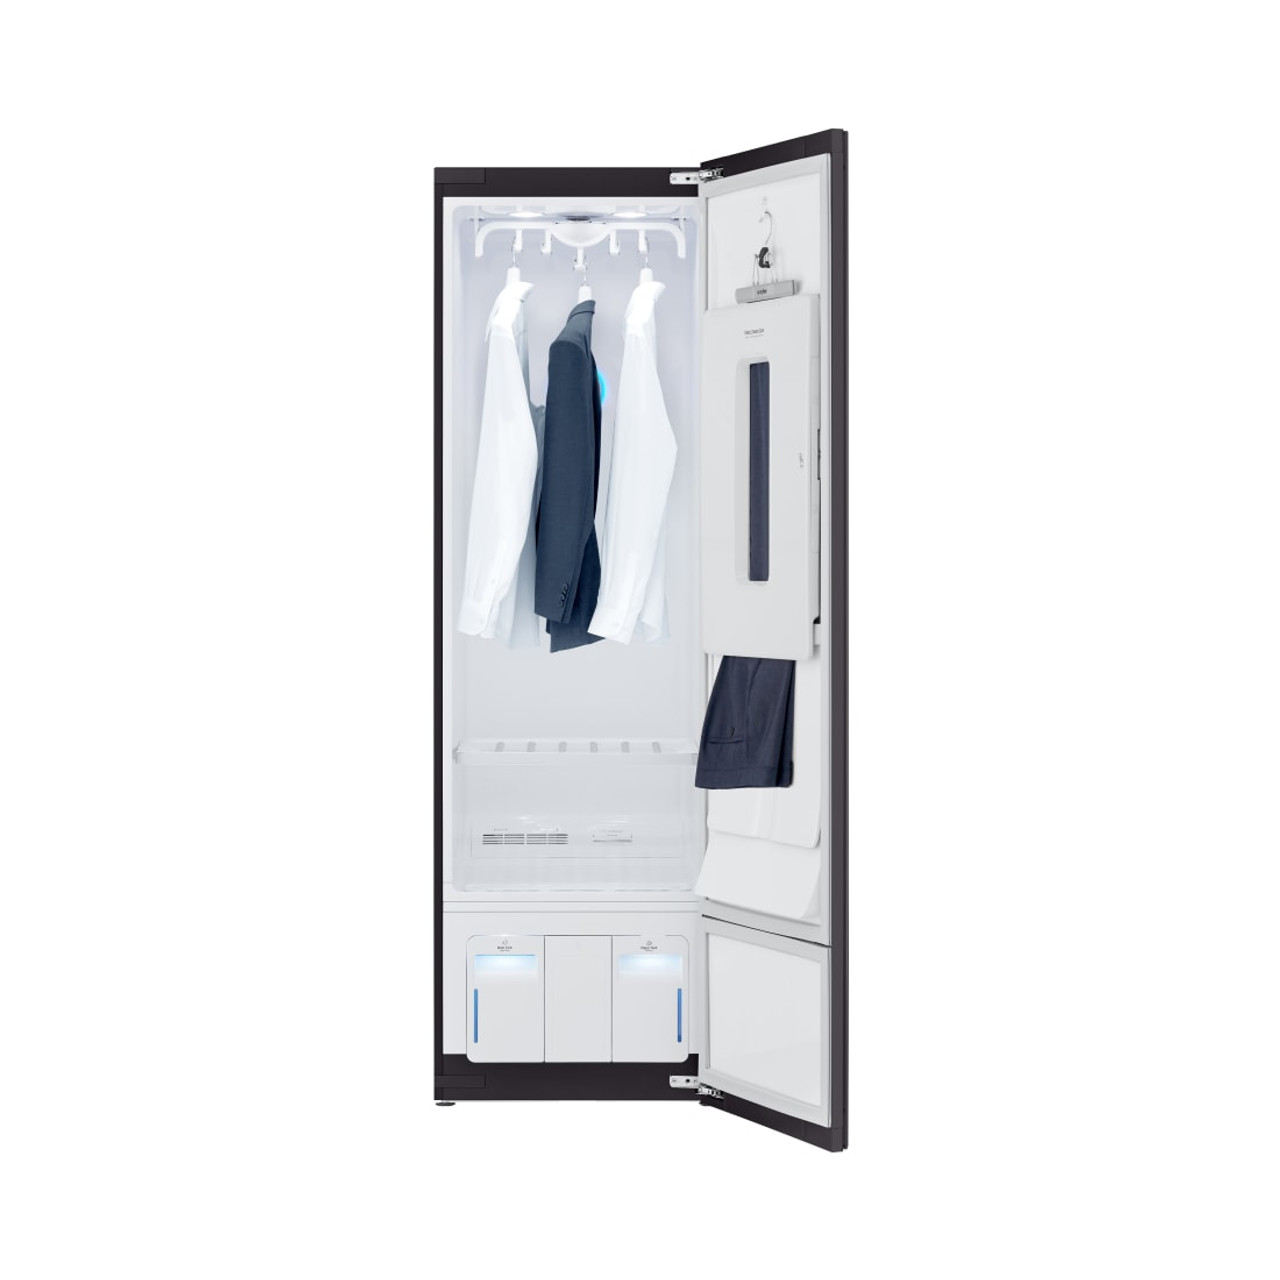 LG STUDIO Styler - Refresh Garments in Minutes with Smart Wi-Fi Enabled Steam Clothing Care System - S5MSB